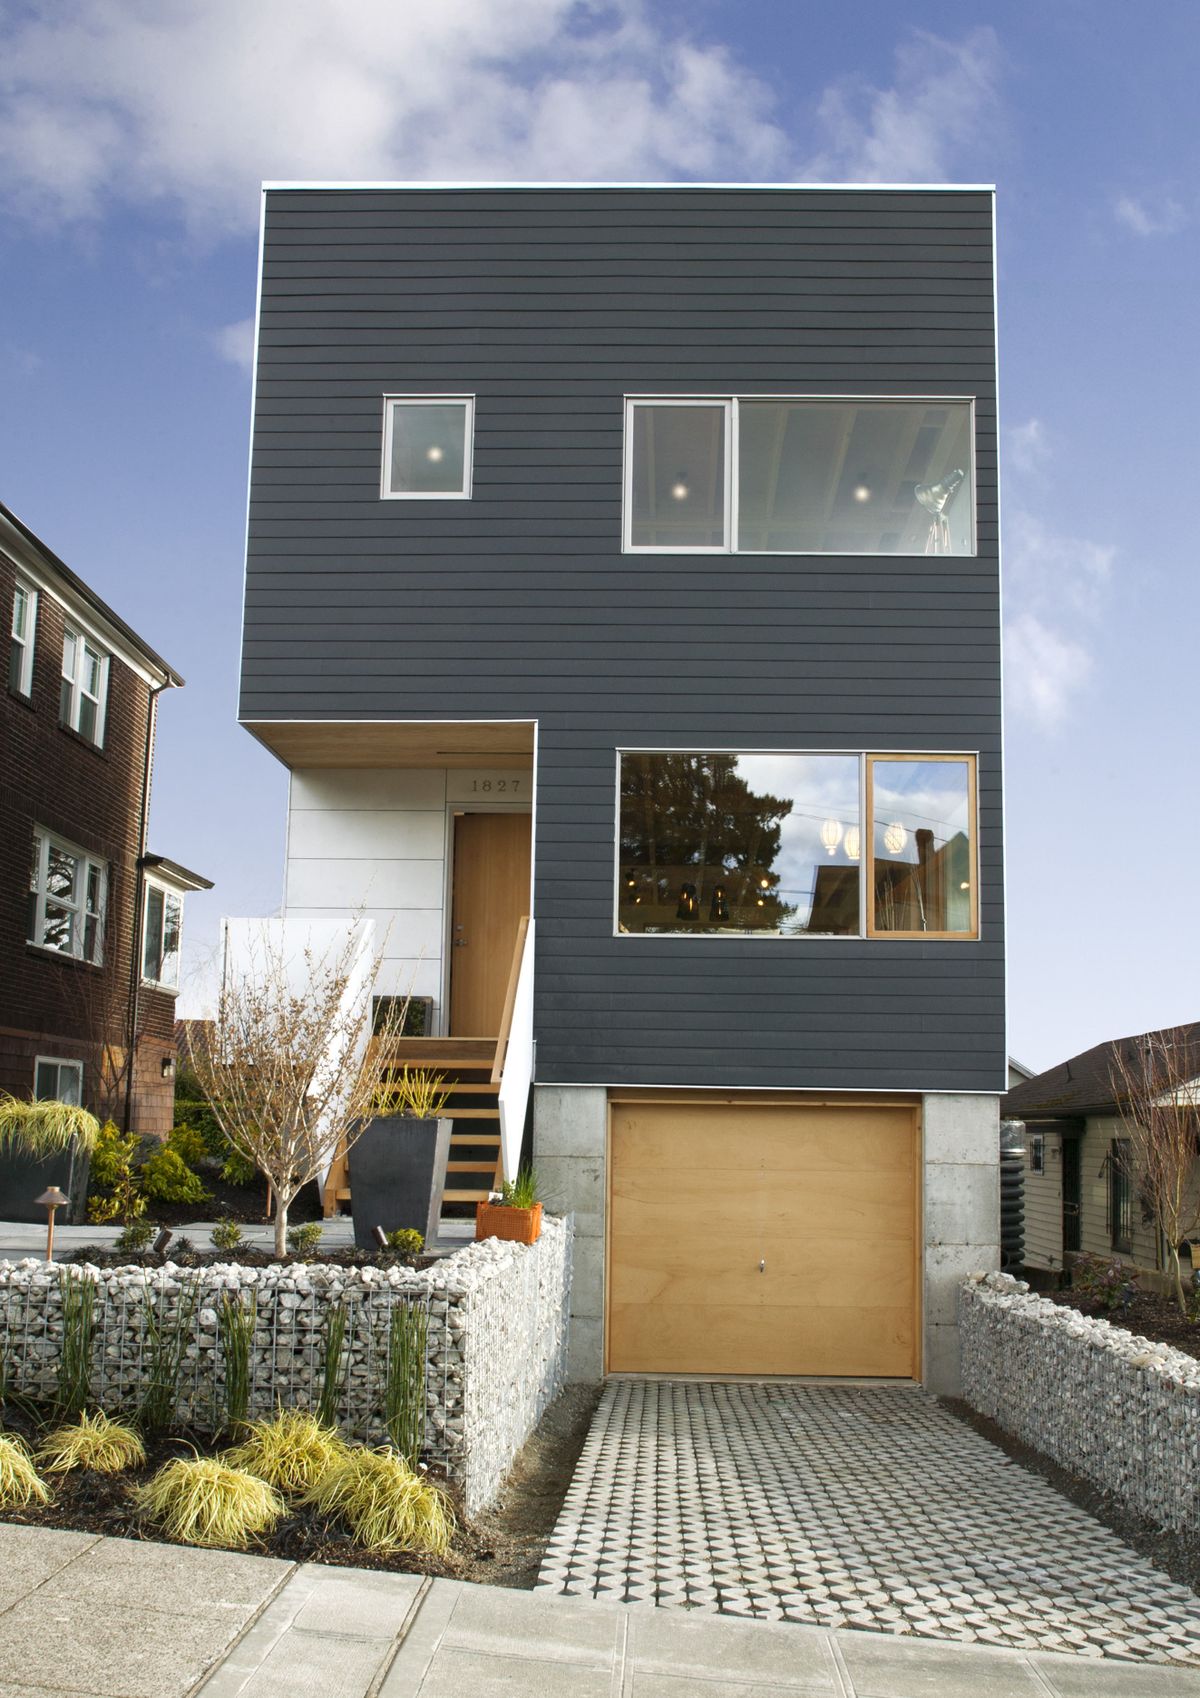 This home, created by Seattle company Greenfab, was the first platinum LEED-certified prefab home in Washington state.